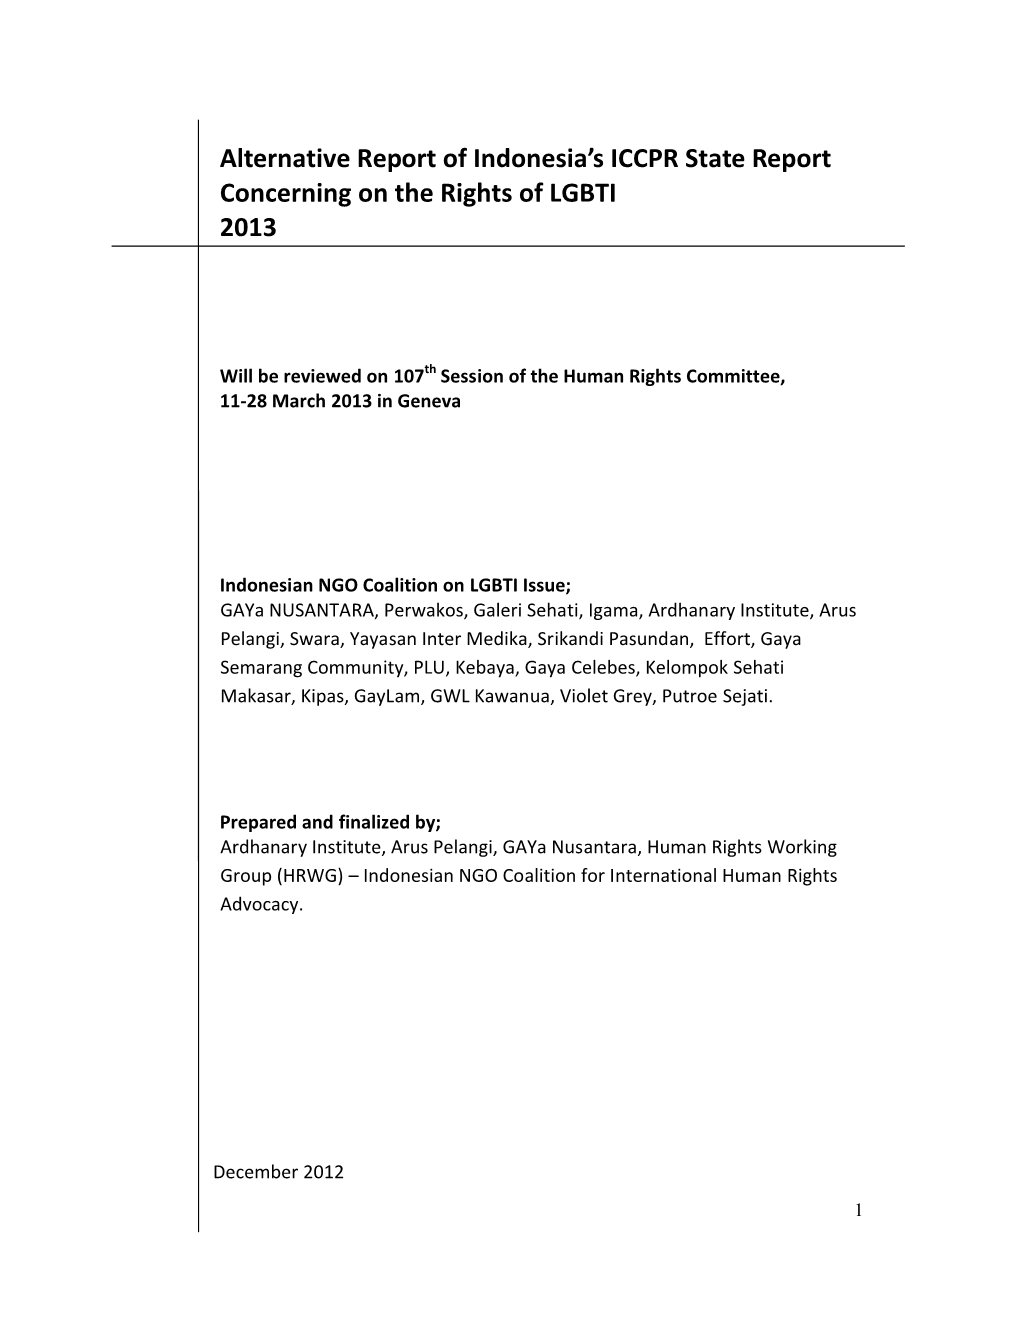 Alternative Report of Indonesia's ICCPR State Report Concerning On